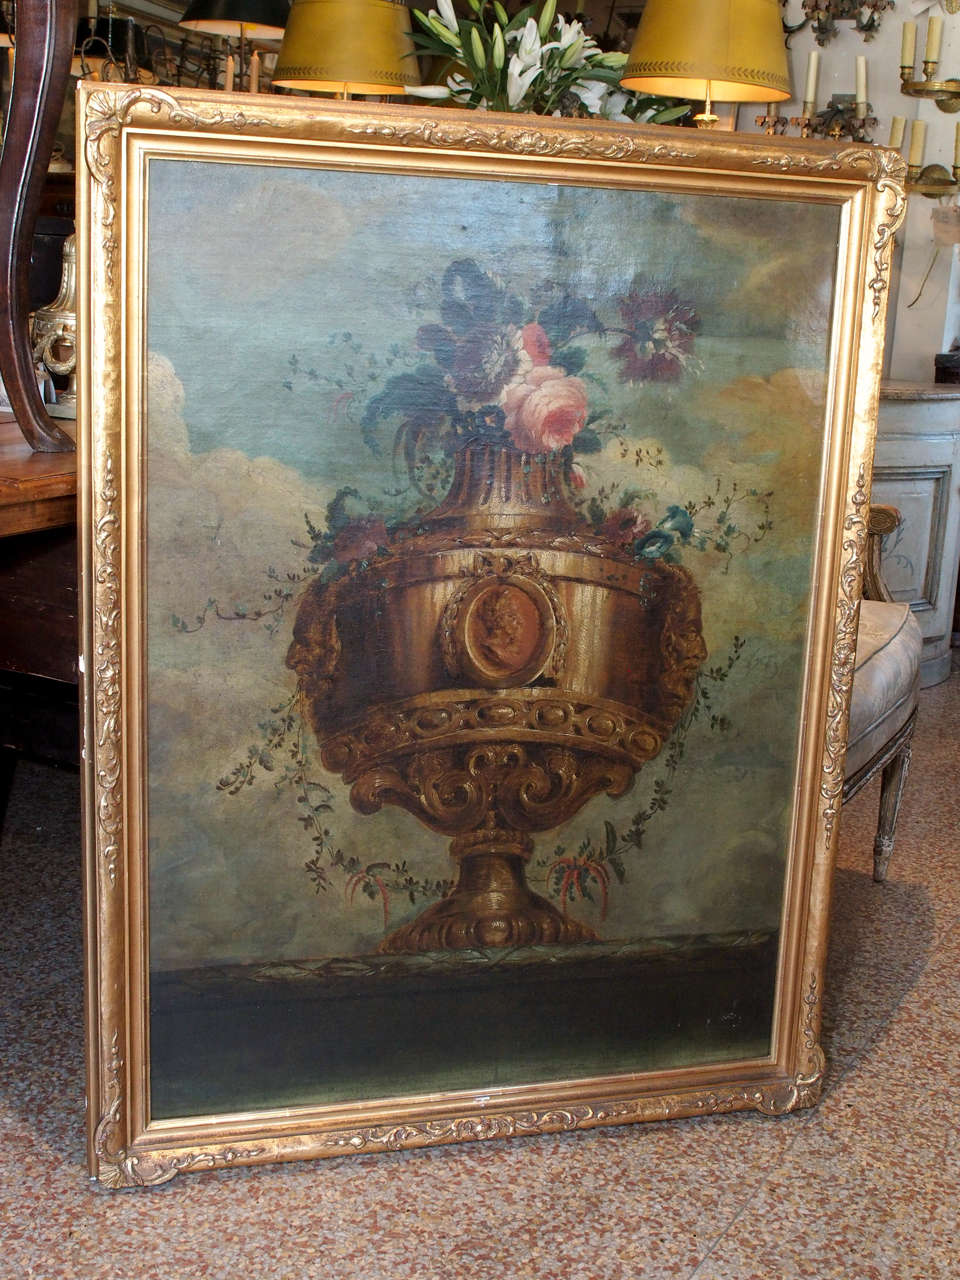 A large framed oil on canvas depicting a carved urn with horned masks with a central medallion in an oval cartouche. Flowers and foliage emerge from the top of the urn.